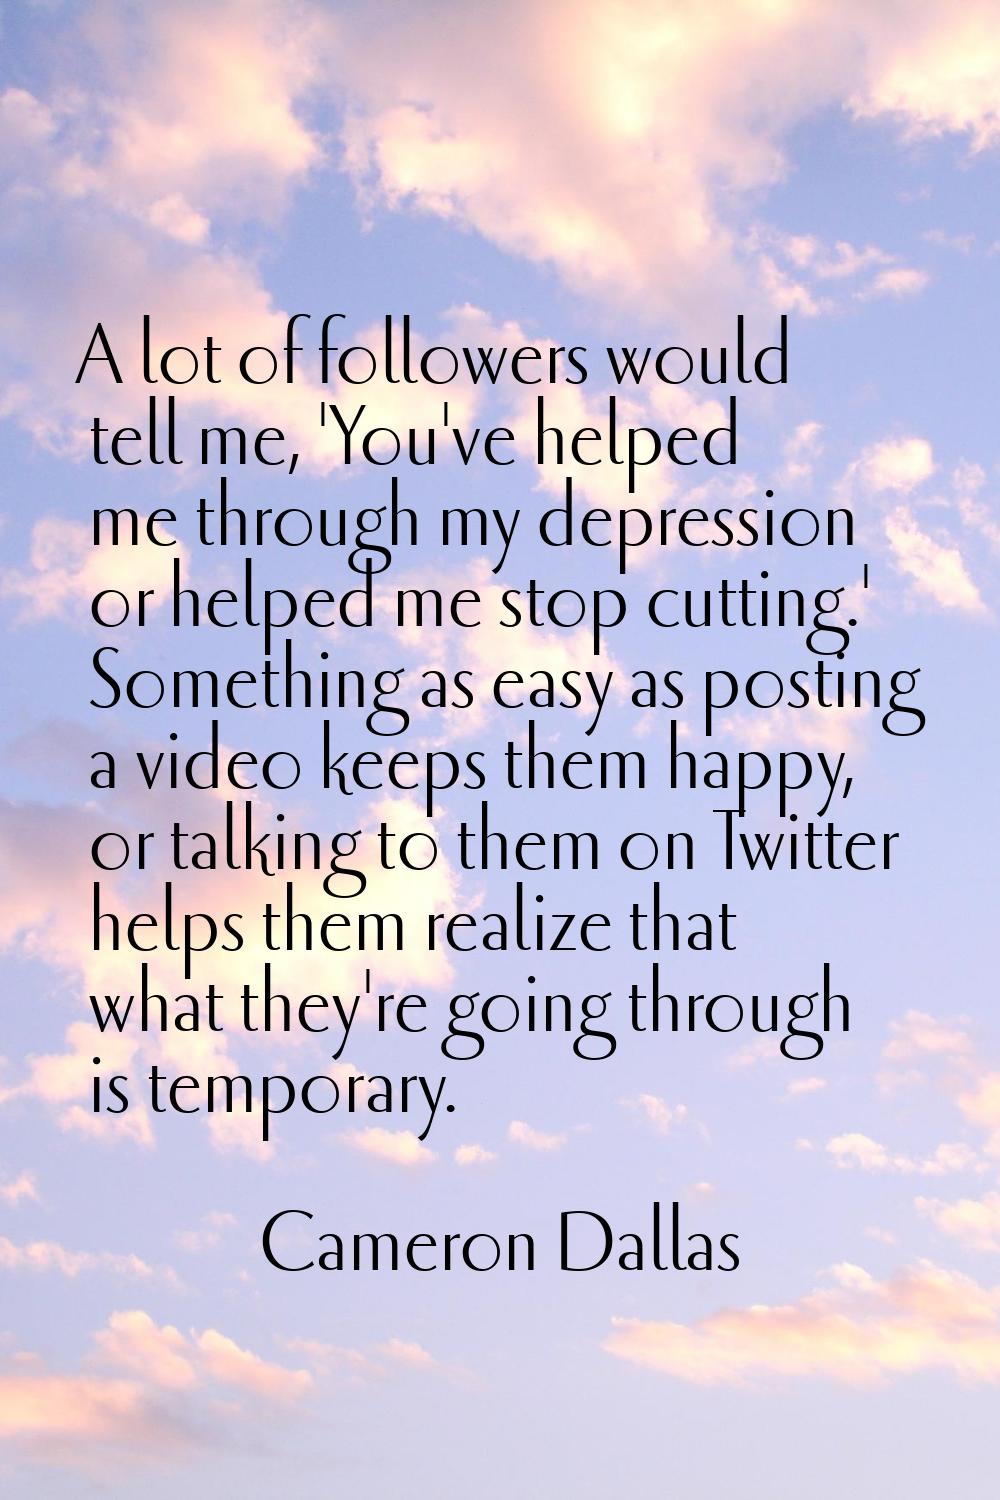 A lot of followers would tell me, 'You've helped me through my depression or helped me stop cutting